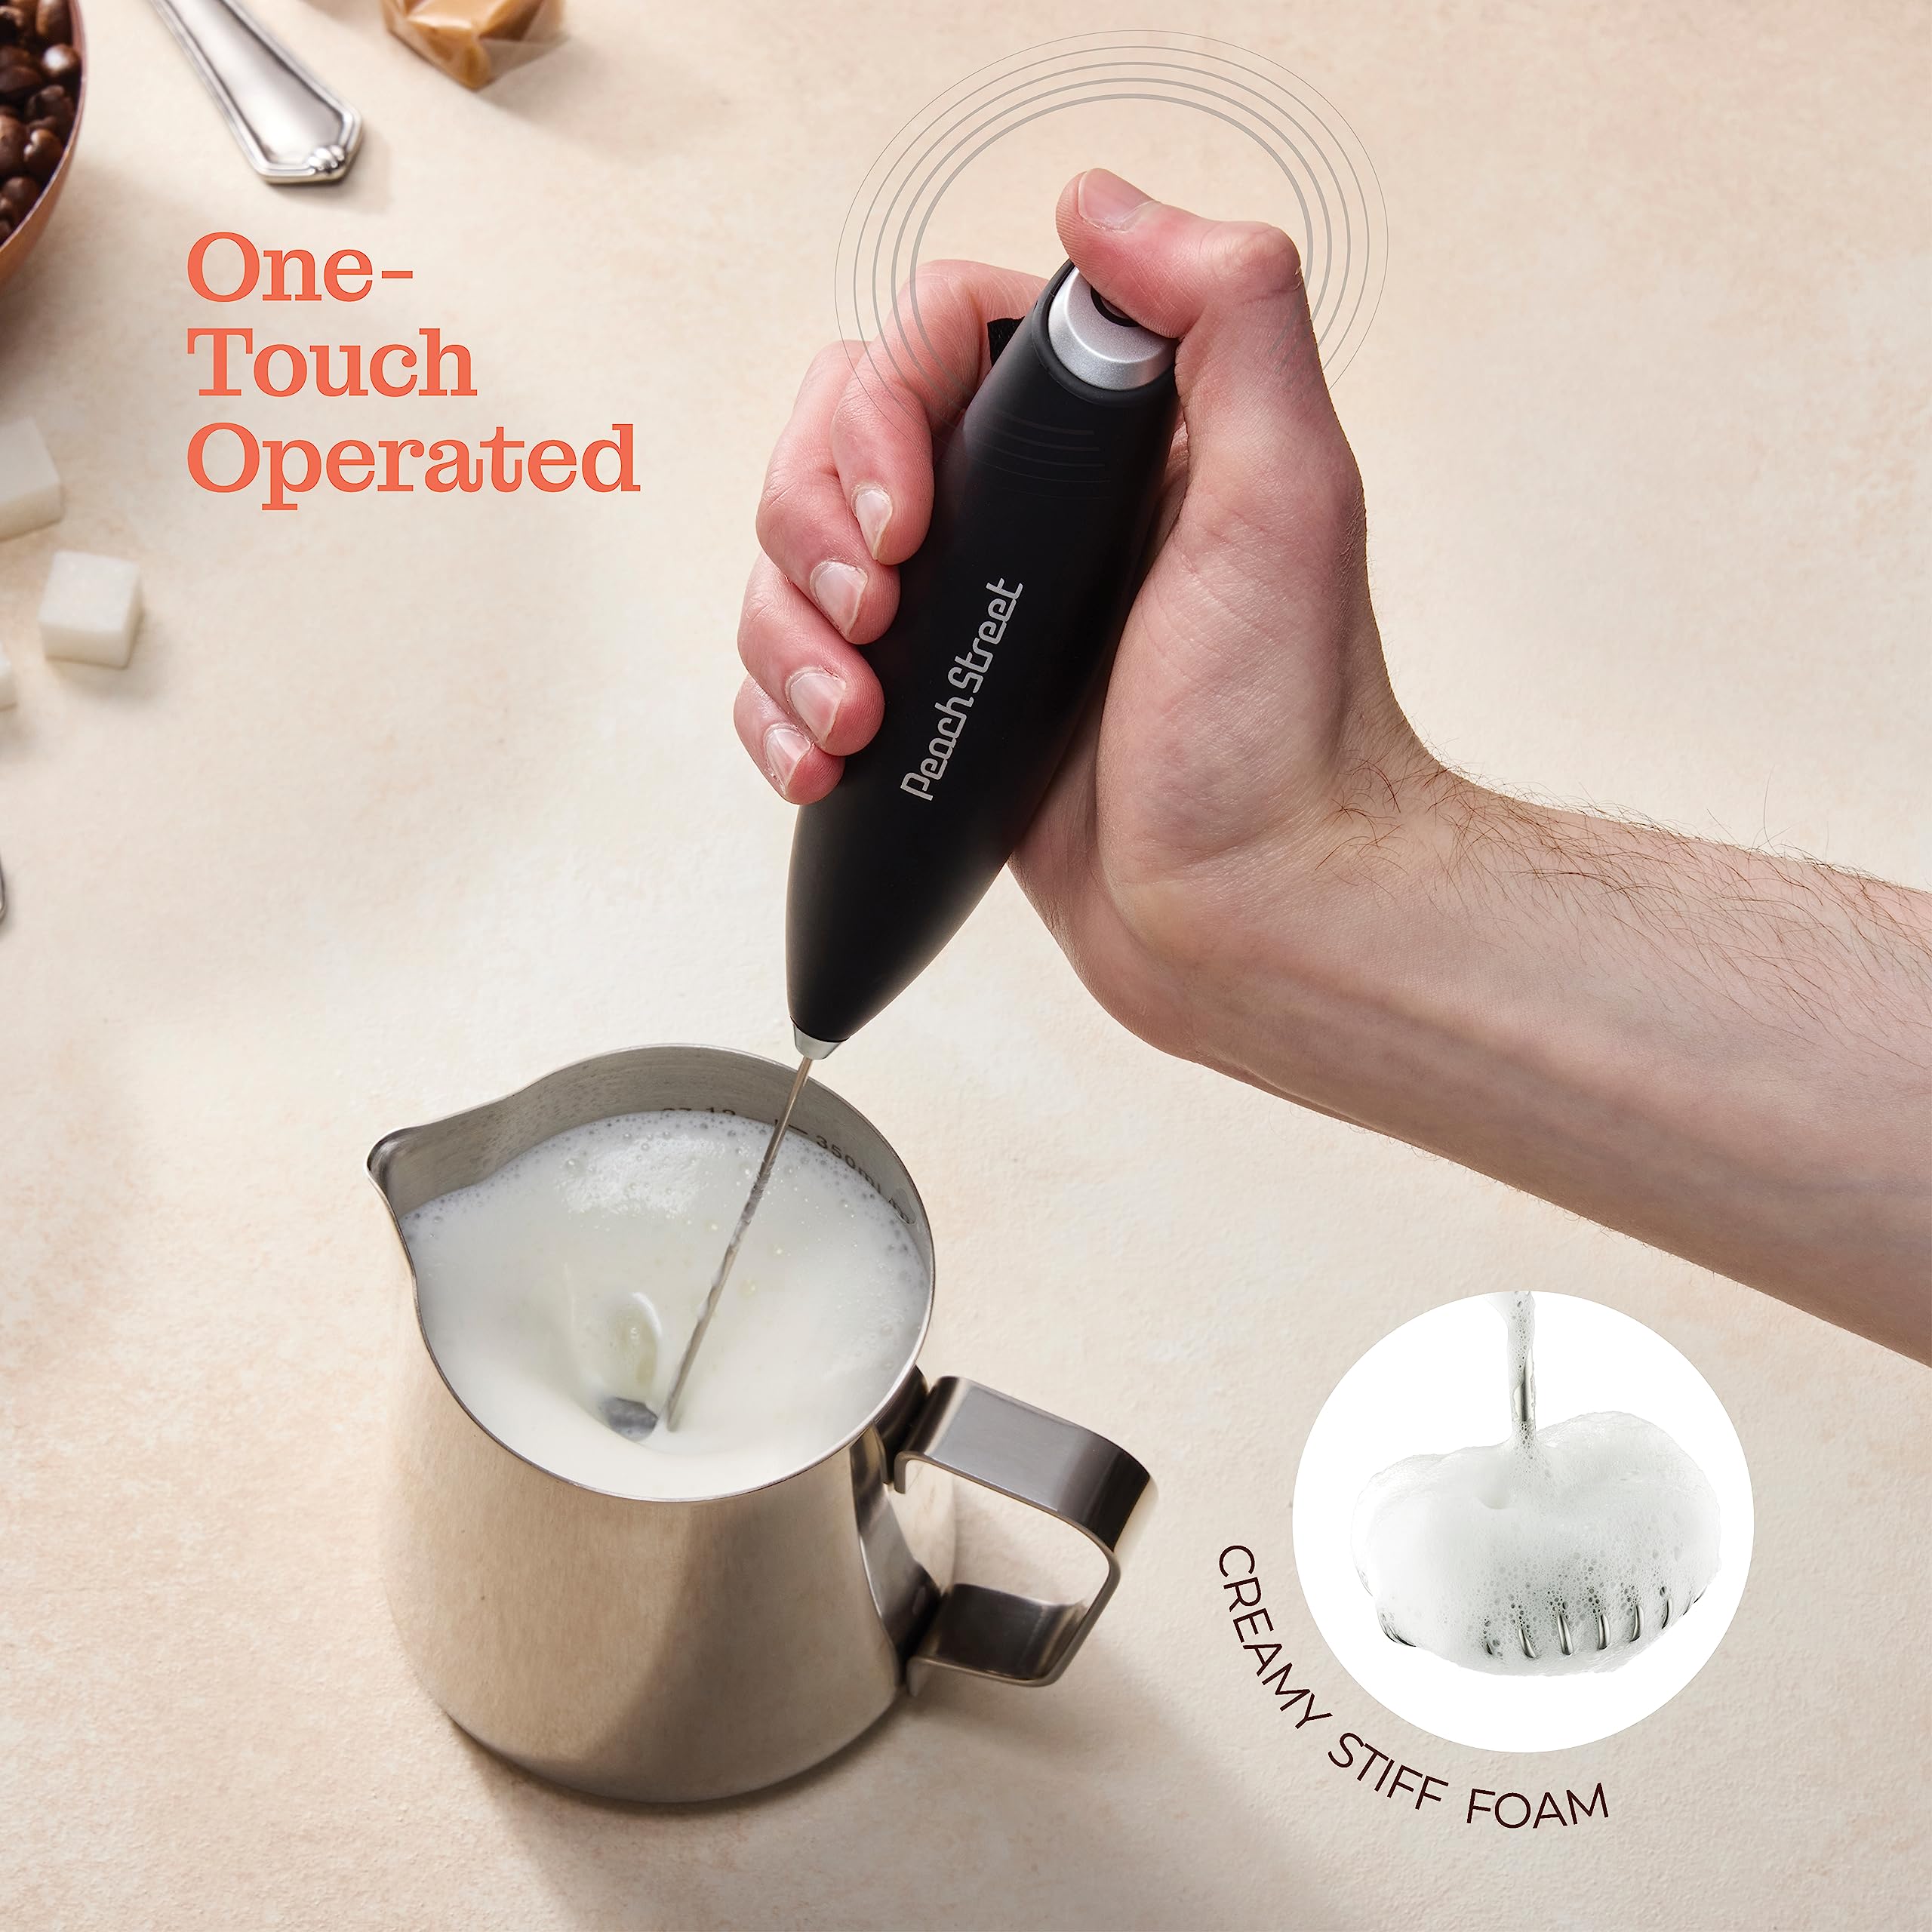 Powerful Handheld Milk Frother, Mini Milk Frother, Battery Operated (Not included) Stainless Steel Drink Mixer - Milk Frother Stand for Milk Coffee, Lattes, Cappuccino, Frappe, Matcha, Hot Chocolate